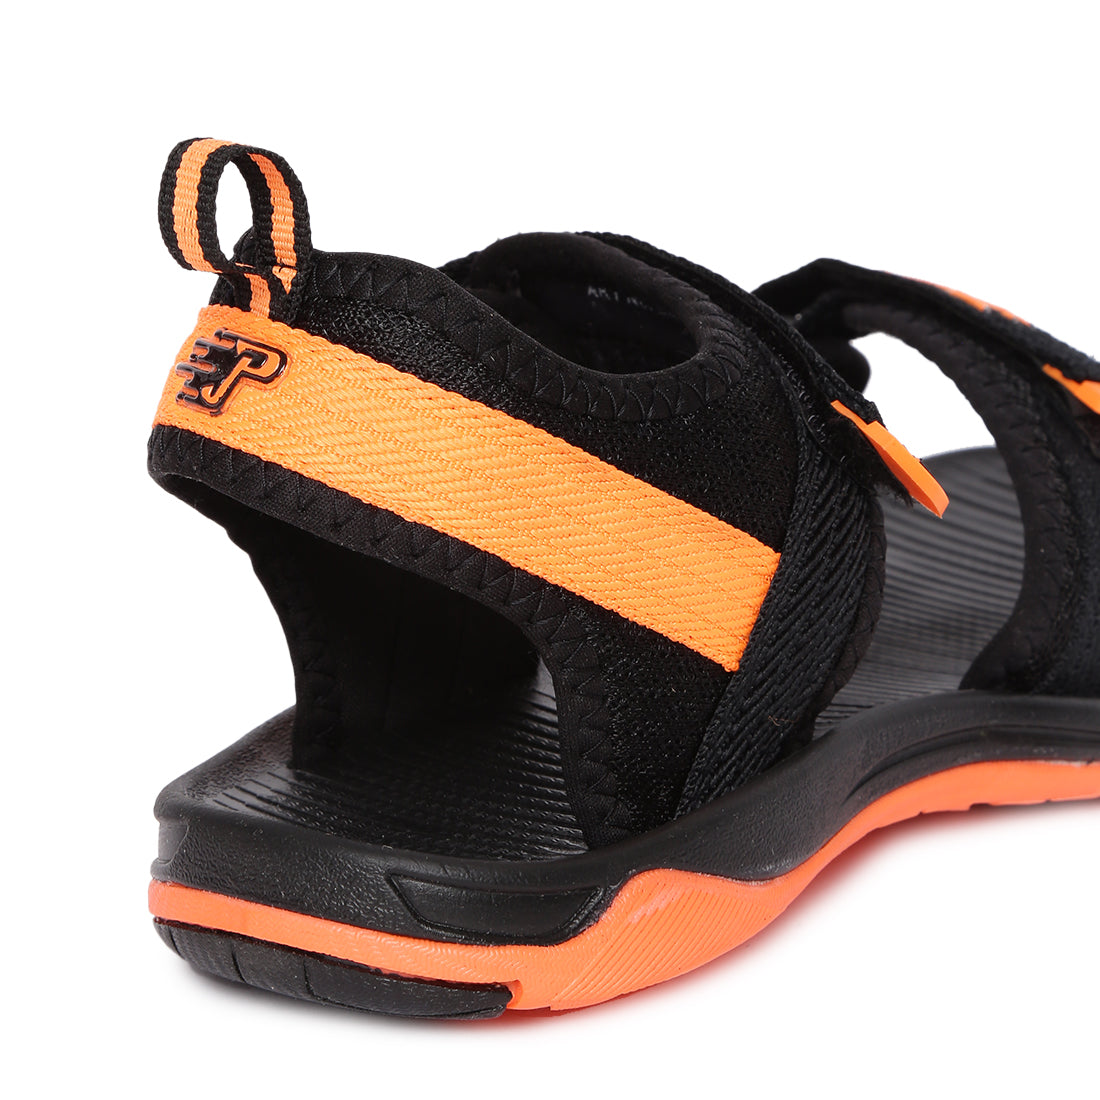 Paragon FBE9144GP Men Stylish Sandals | Comfortable Sandals for Daily Outdoor Use | Casual Formal Sandals with Cushioned Soles